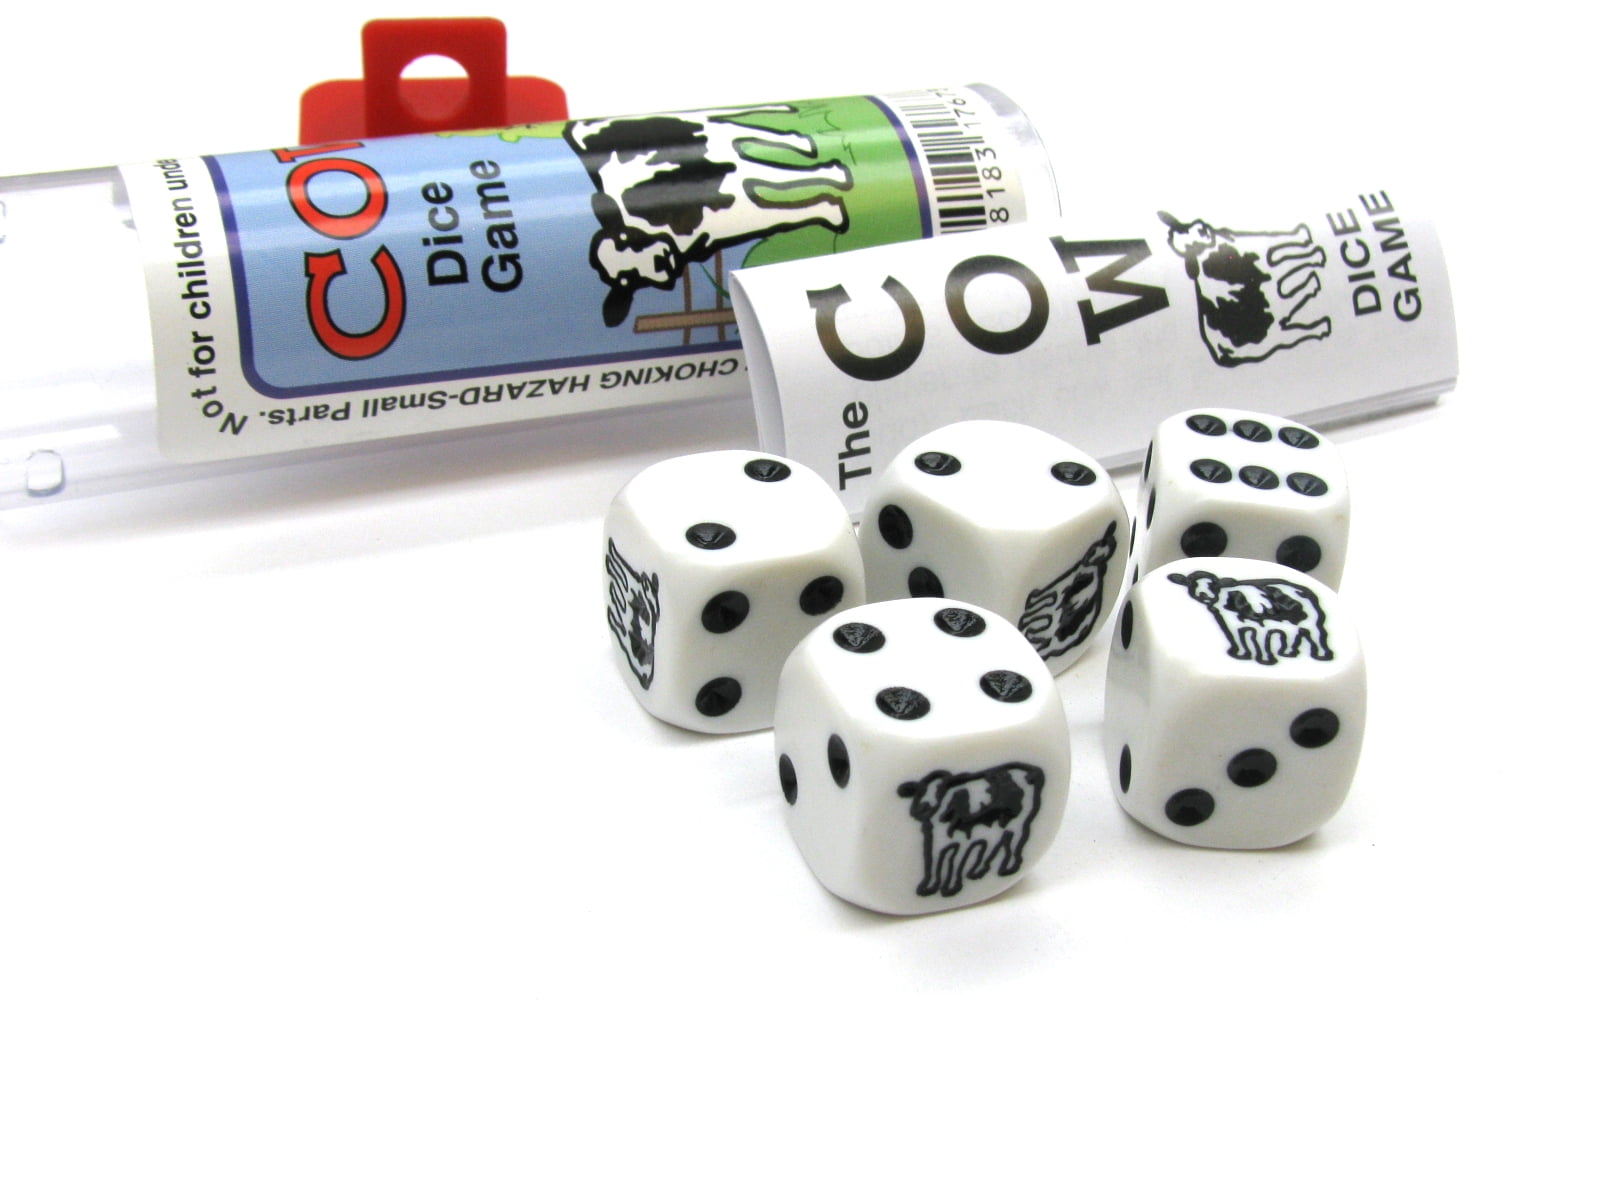 NEW 8-Sided Poker Dice Game in Tube 5 Eight Sided D8 Gambling Set Koplow